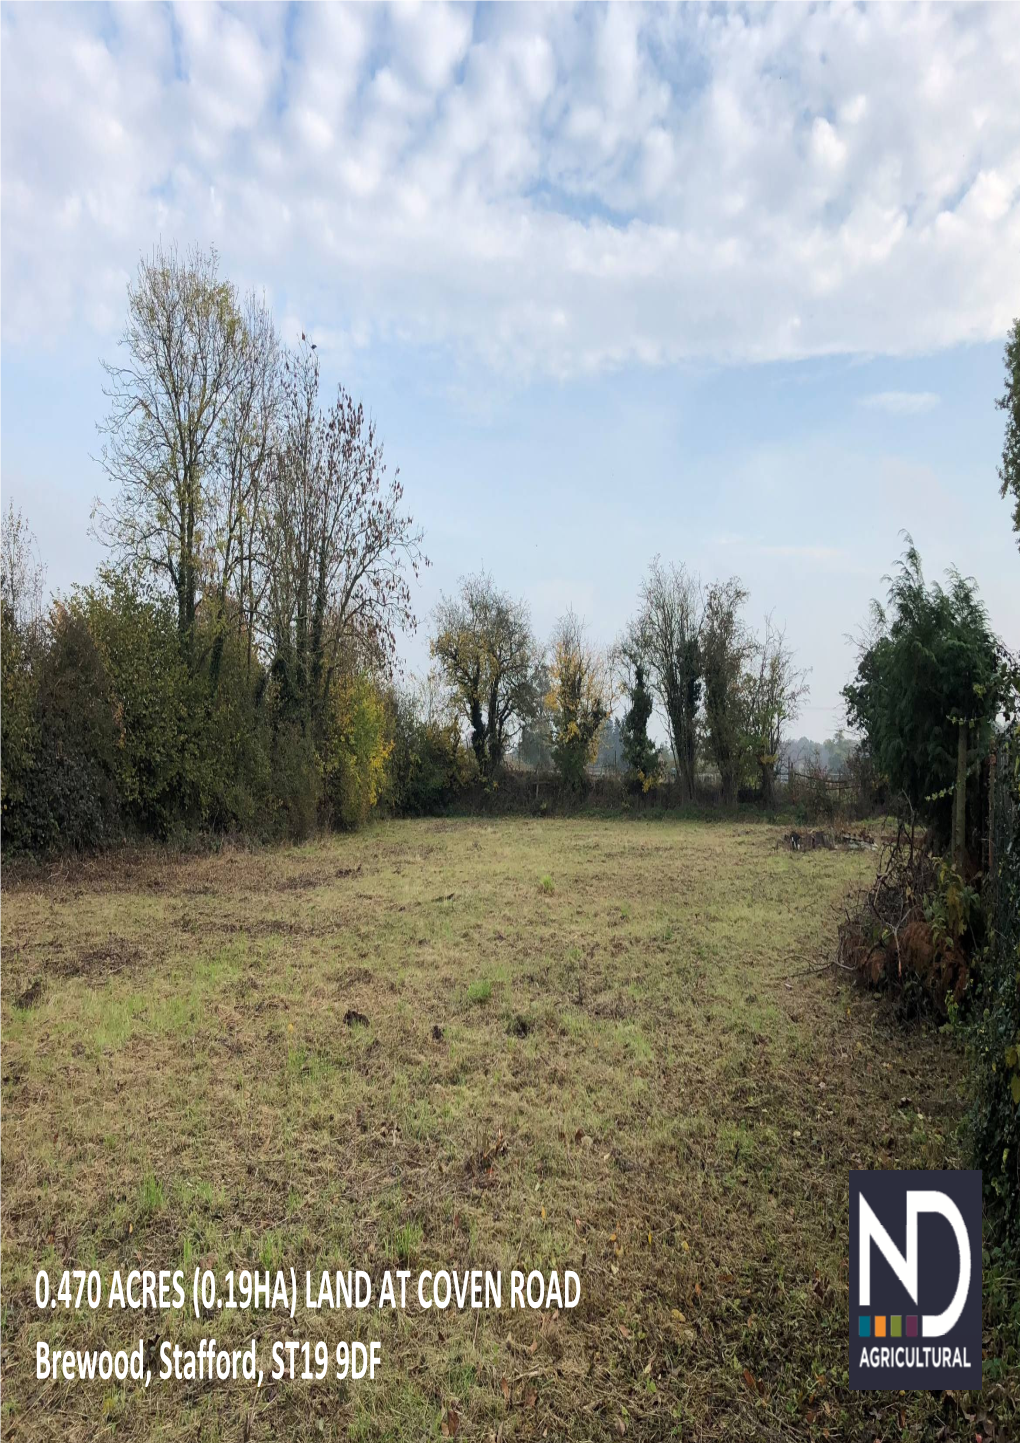 LAND at COVEN ROAD Brewood, Stafford, ST19 9DF